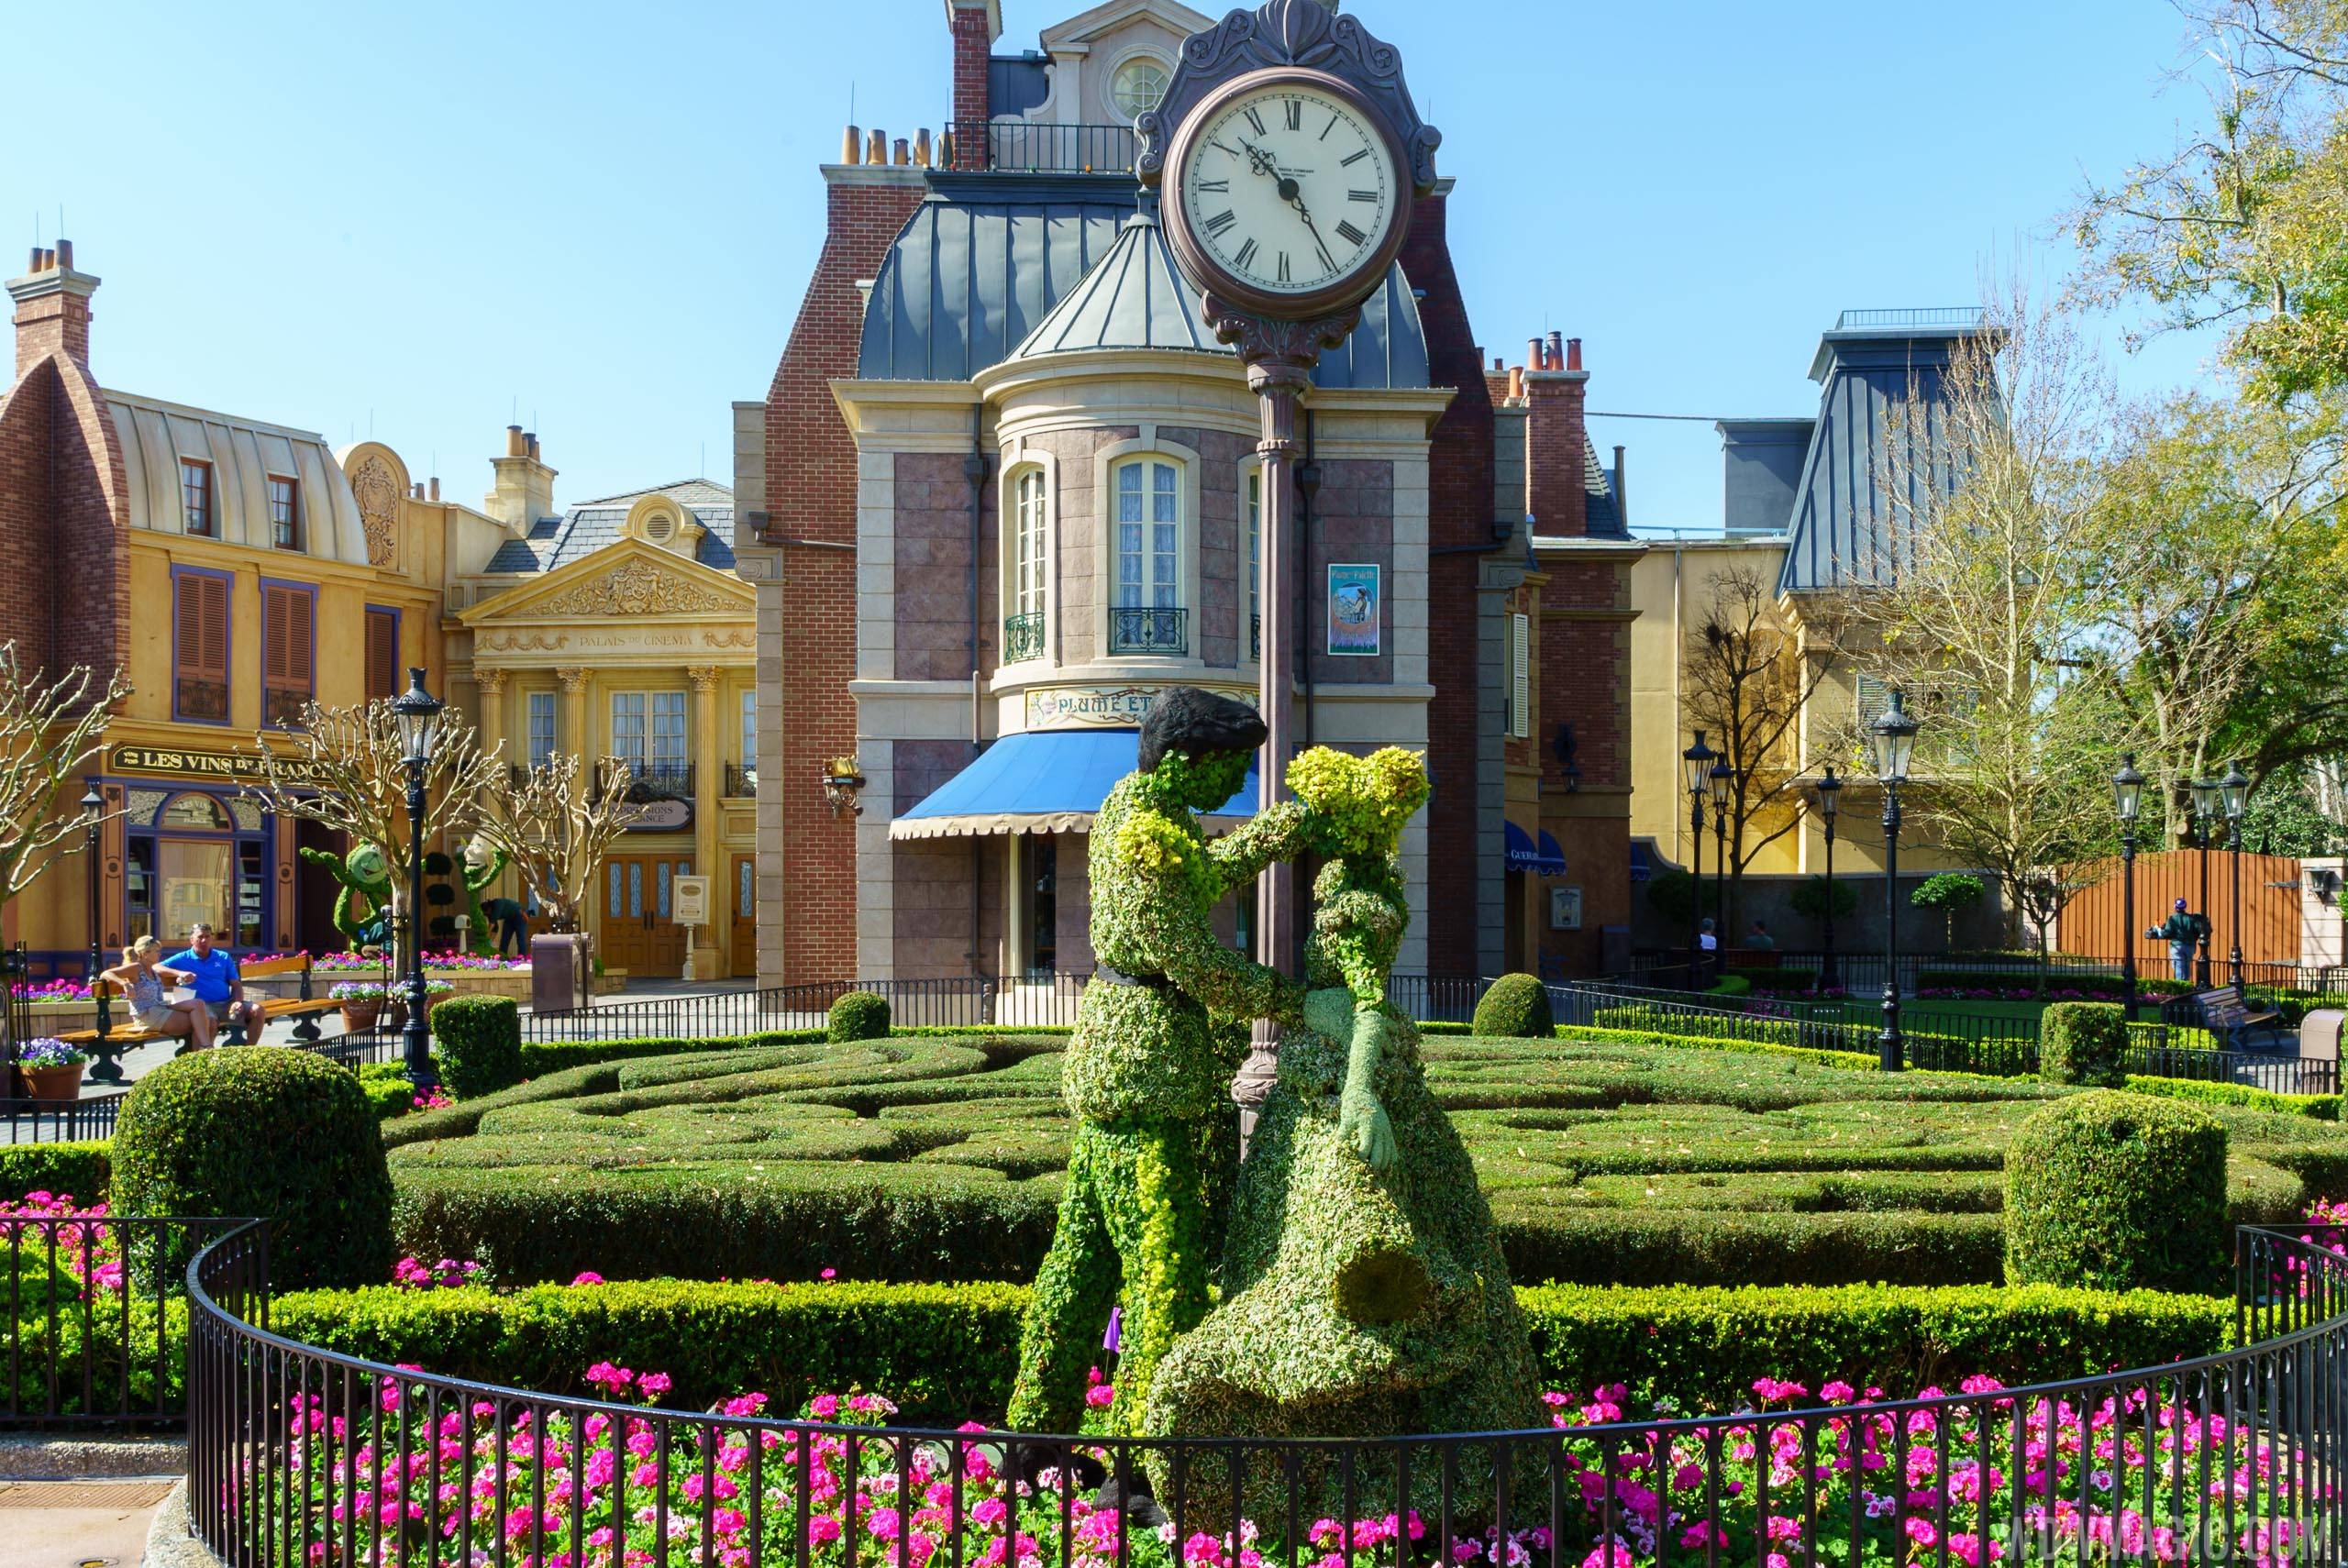 2016 Epcot International Flower and Garden Festival - Cinderella and Prince Charming in the France Pavilion